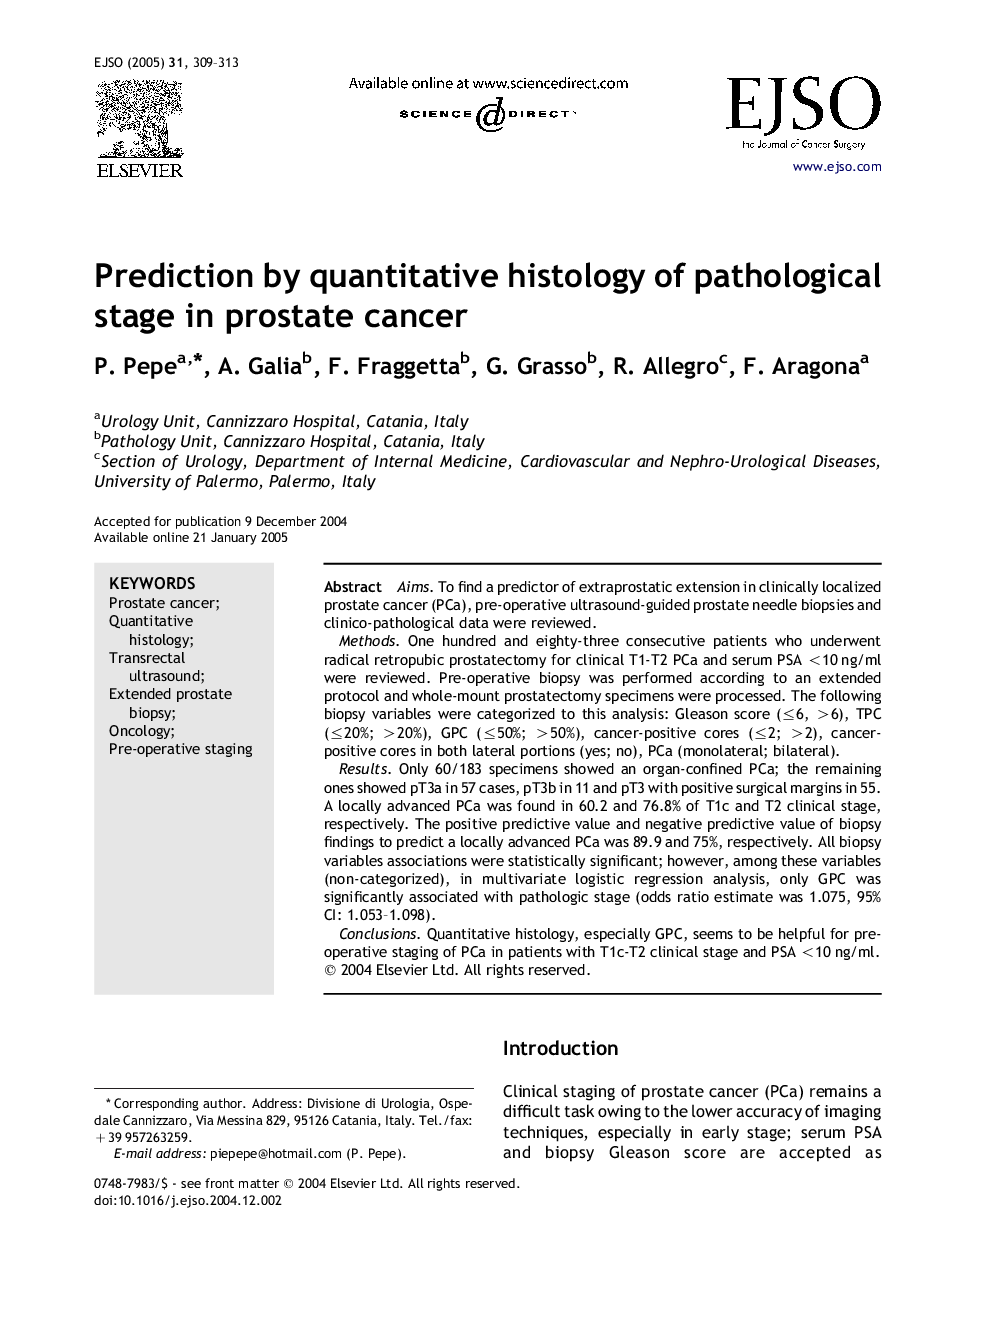 Prediction by quantitative histology of pathological stage in prostate cancer